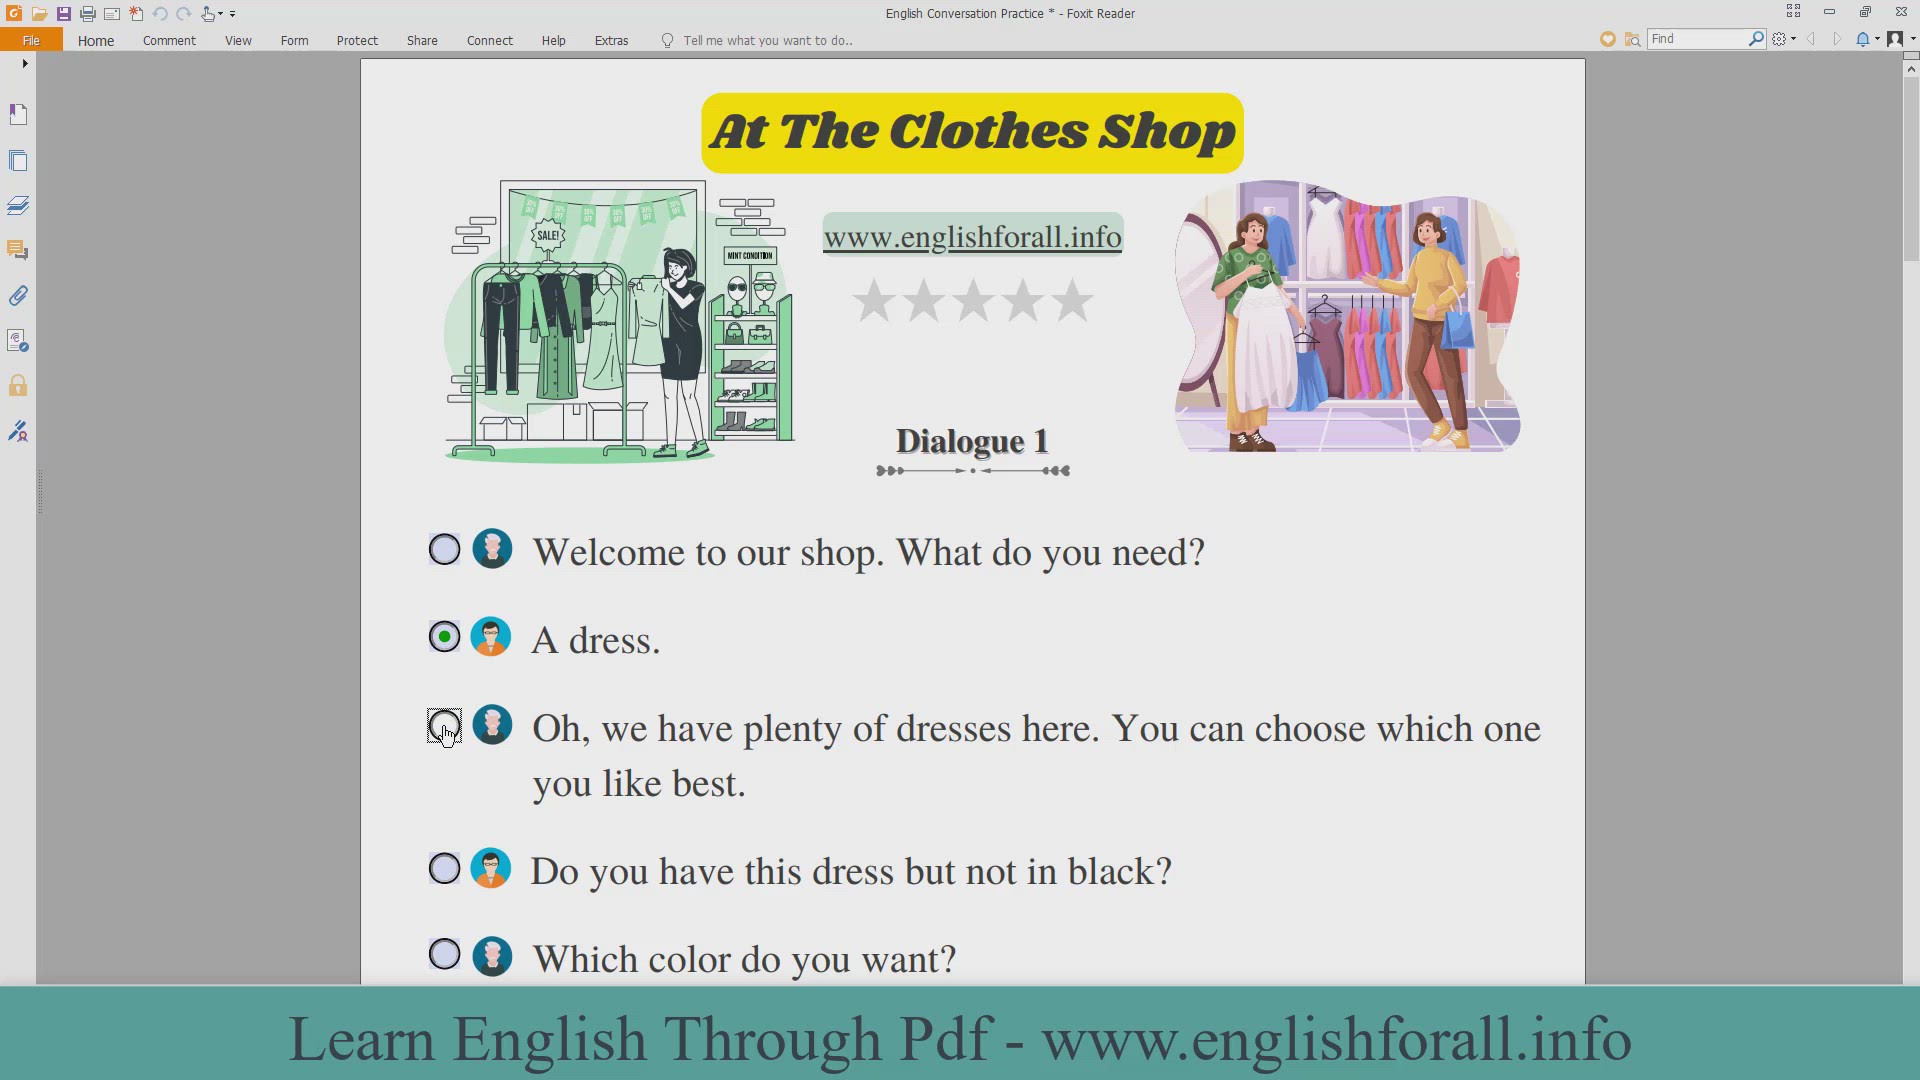 'Video thumbnail for English Conversation Practice - At The Clothes Shop'